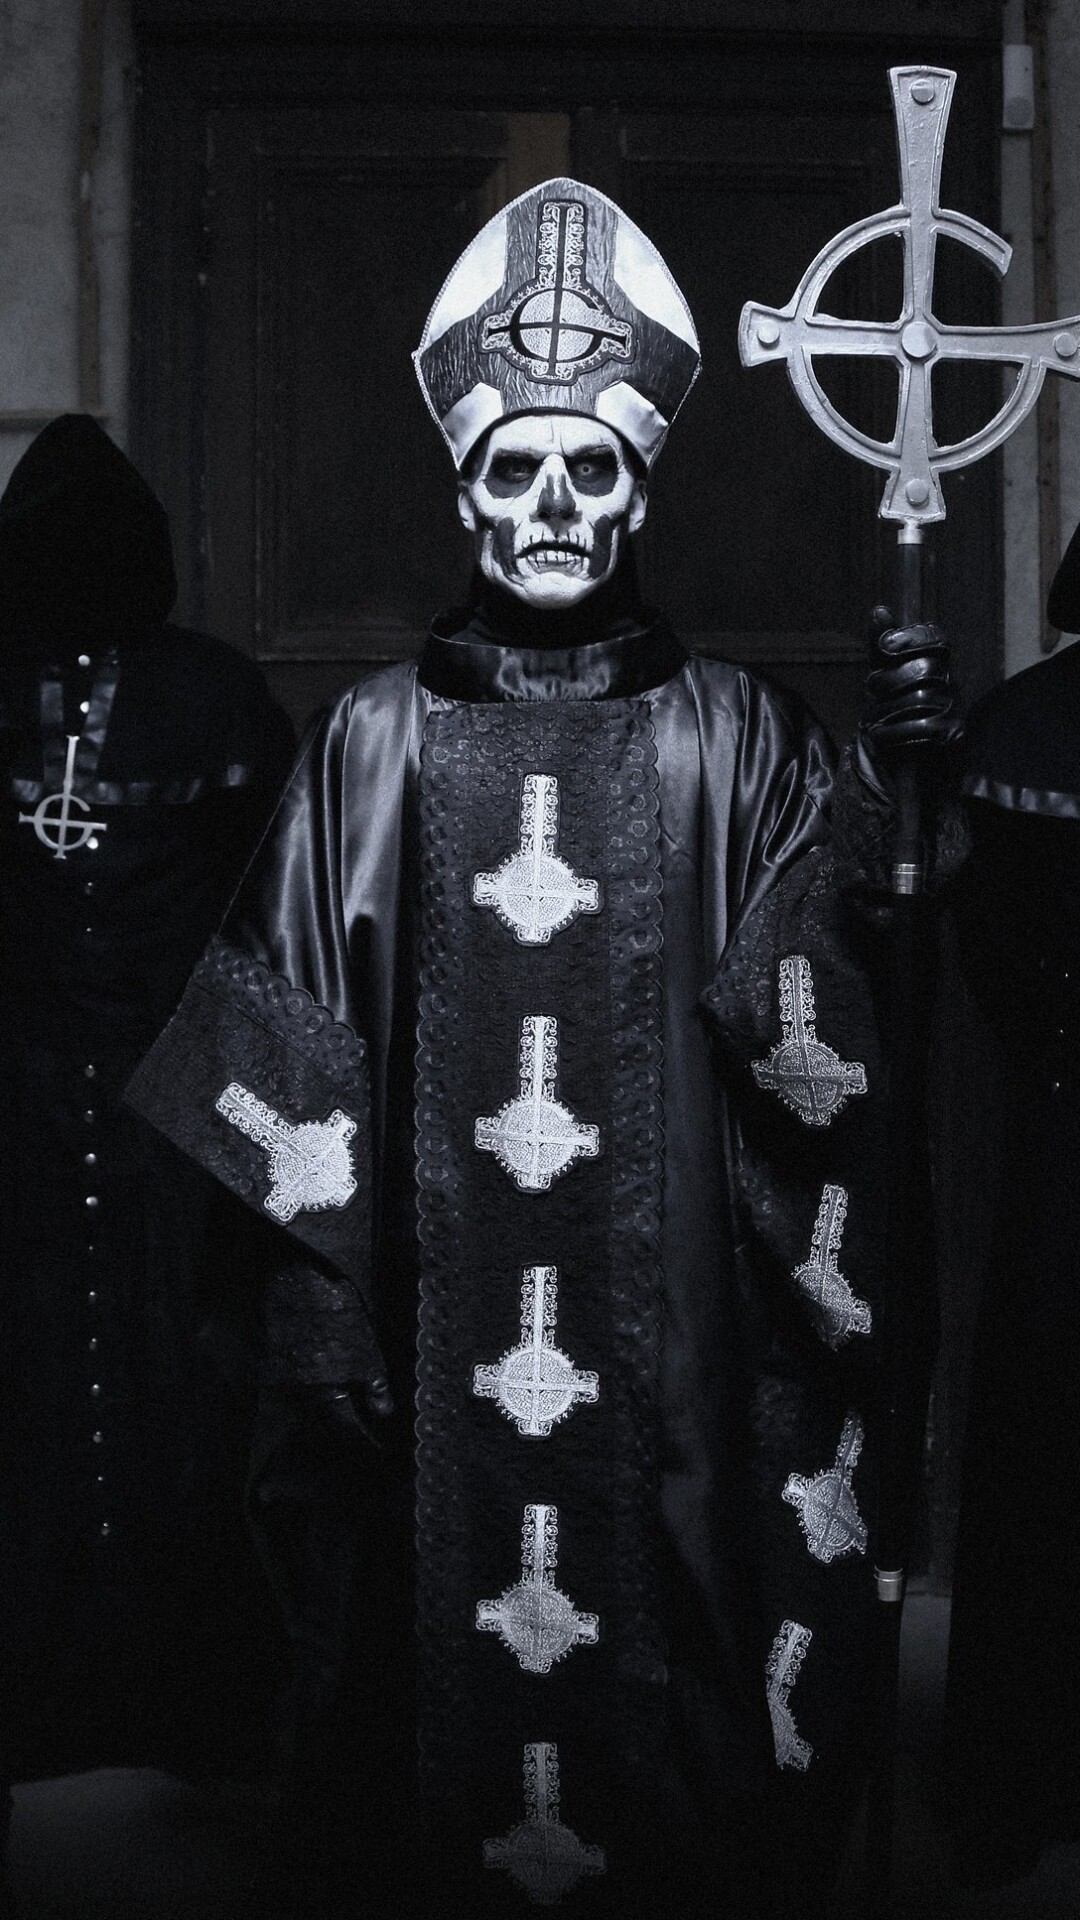 Ghost (Band): A member of the Group of Nameless Ghouls, A Ghoul Writer, Cardinal Copia. 1080x1920 Full HD Wallpaper.